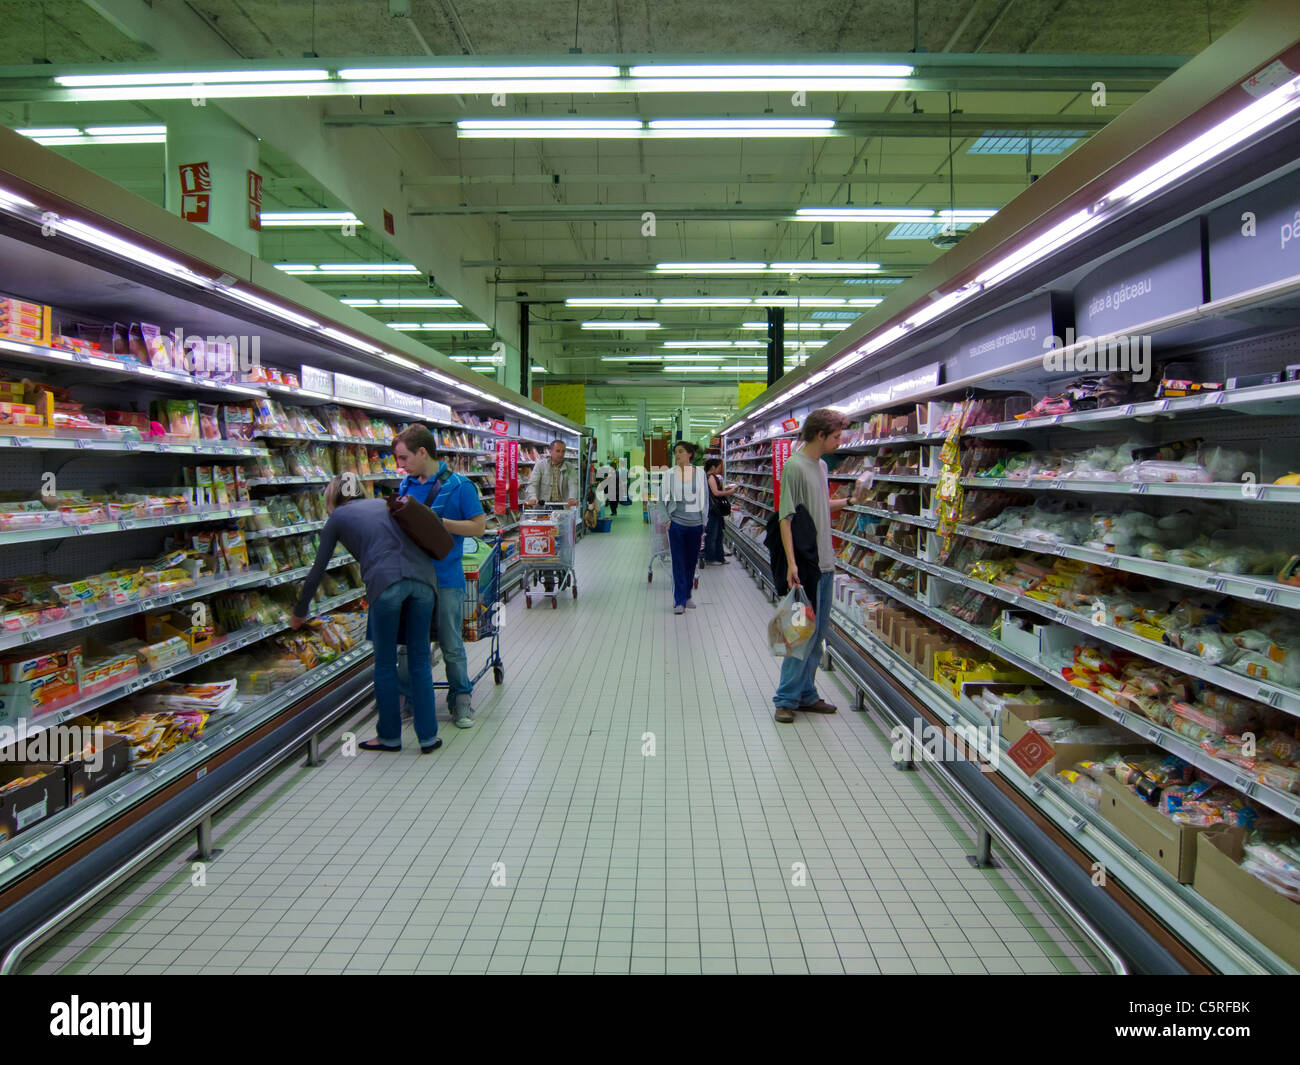 Paris France People Shopping Inside Aisles Of French Mega Store Carrefour Supermarket Montreuil Inside View Of Supermarket Stock Photo Alamy